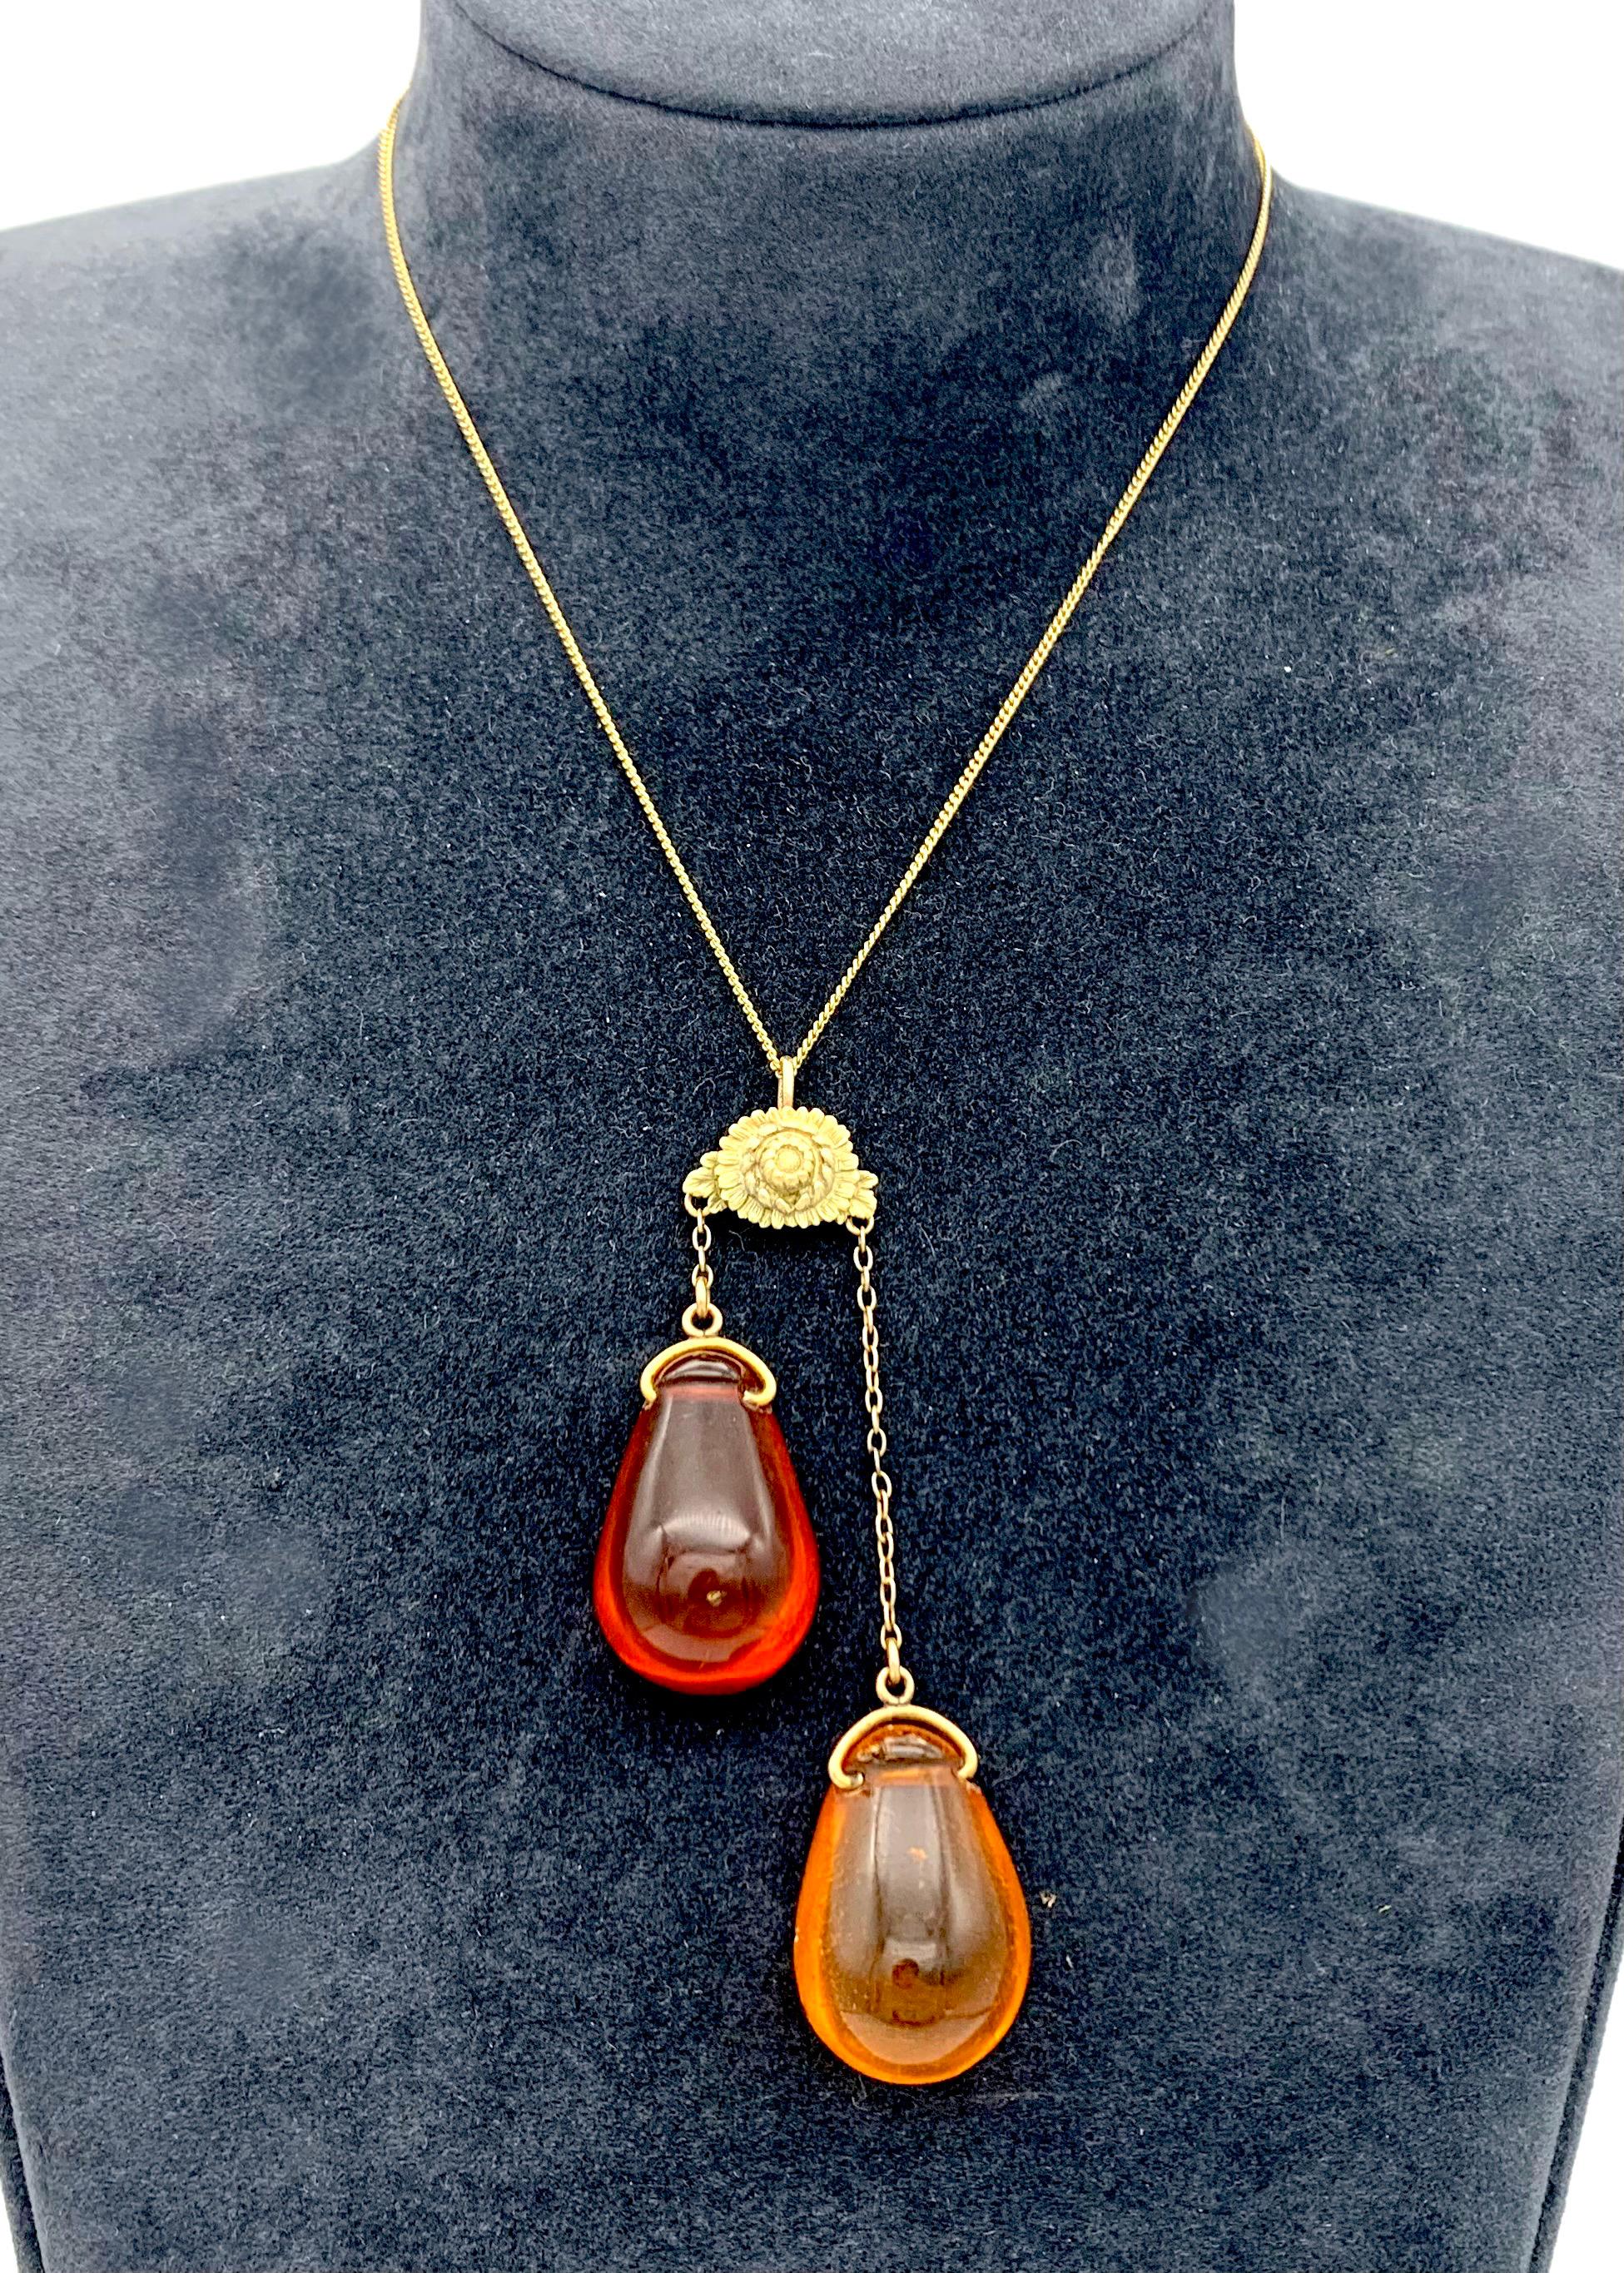 This unusual Art Nouveau jewel was created towards the end of the 19th century. From a beautifully modelled chrysanthemum two wonderful thick and sensuous clear and transparent amber drops are suspended. The amber pieces are drilled and are mounted